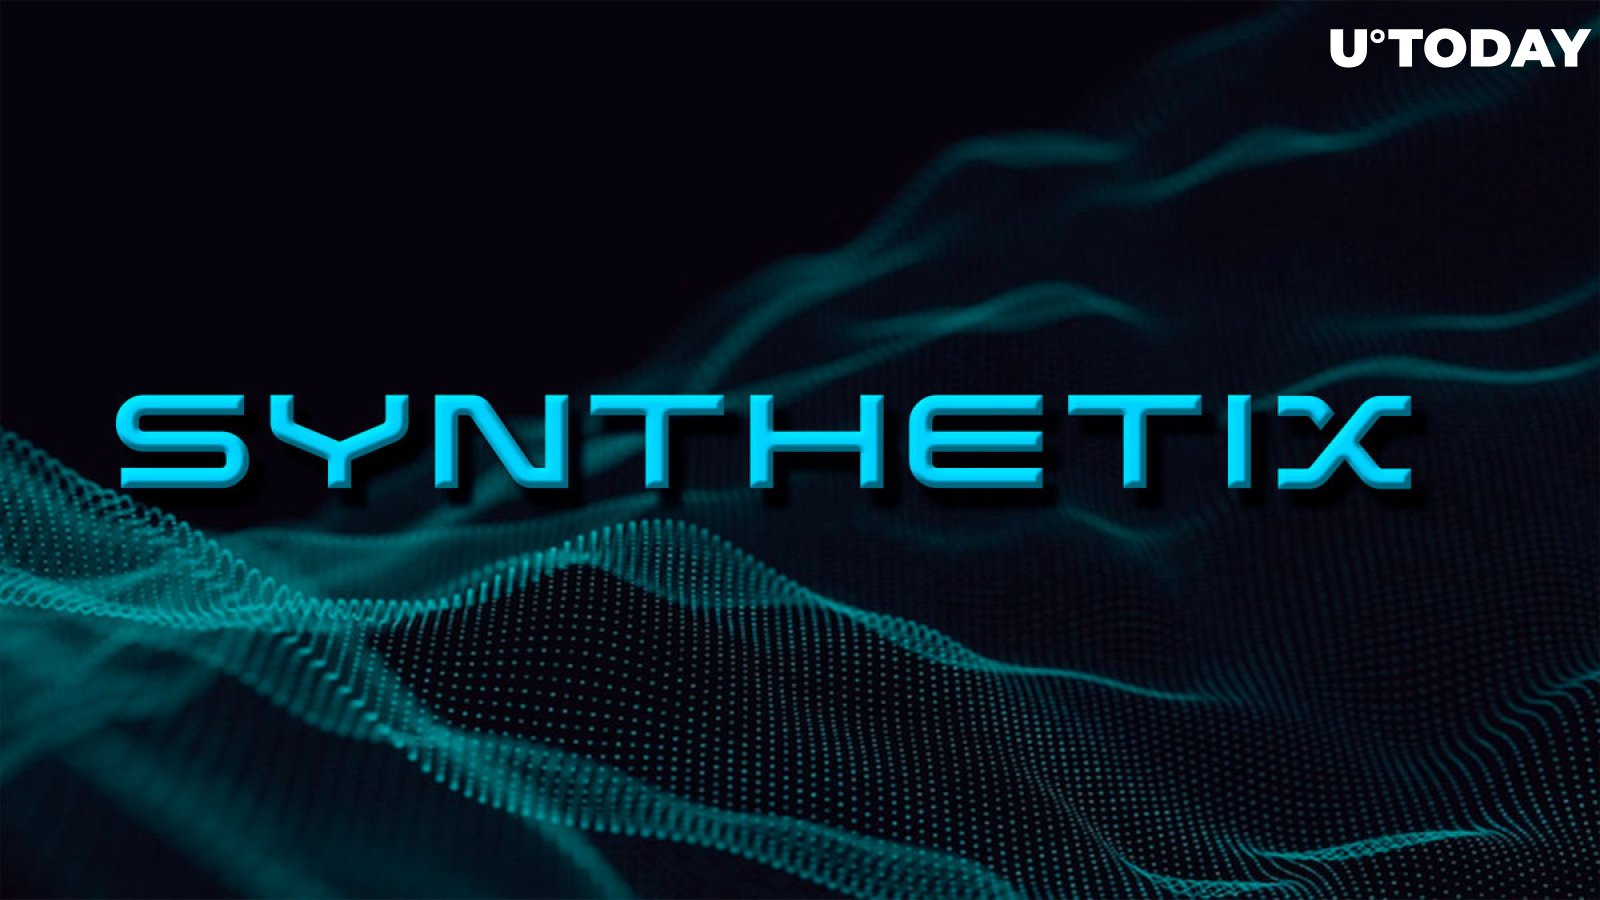 Synthetix (SNX) Price Doesn't Follow Revenue Boom, Here's Why